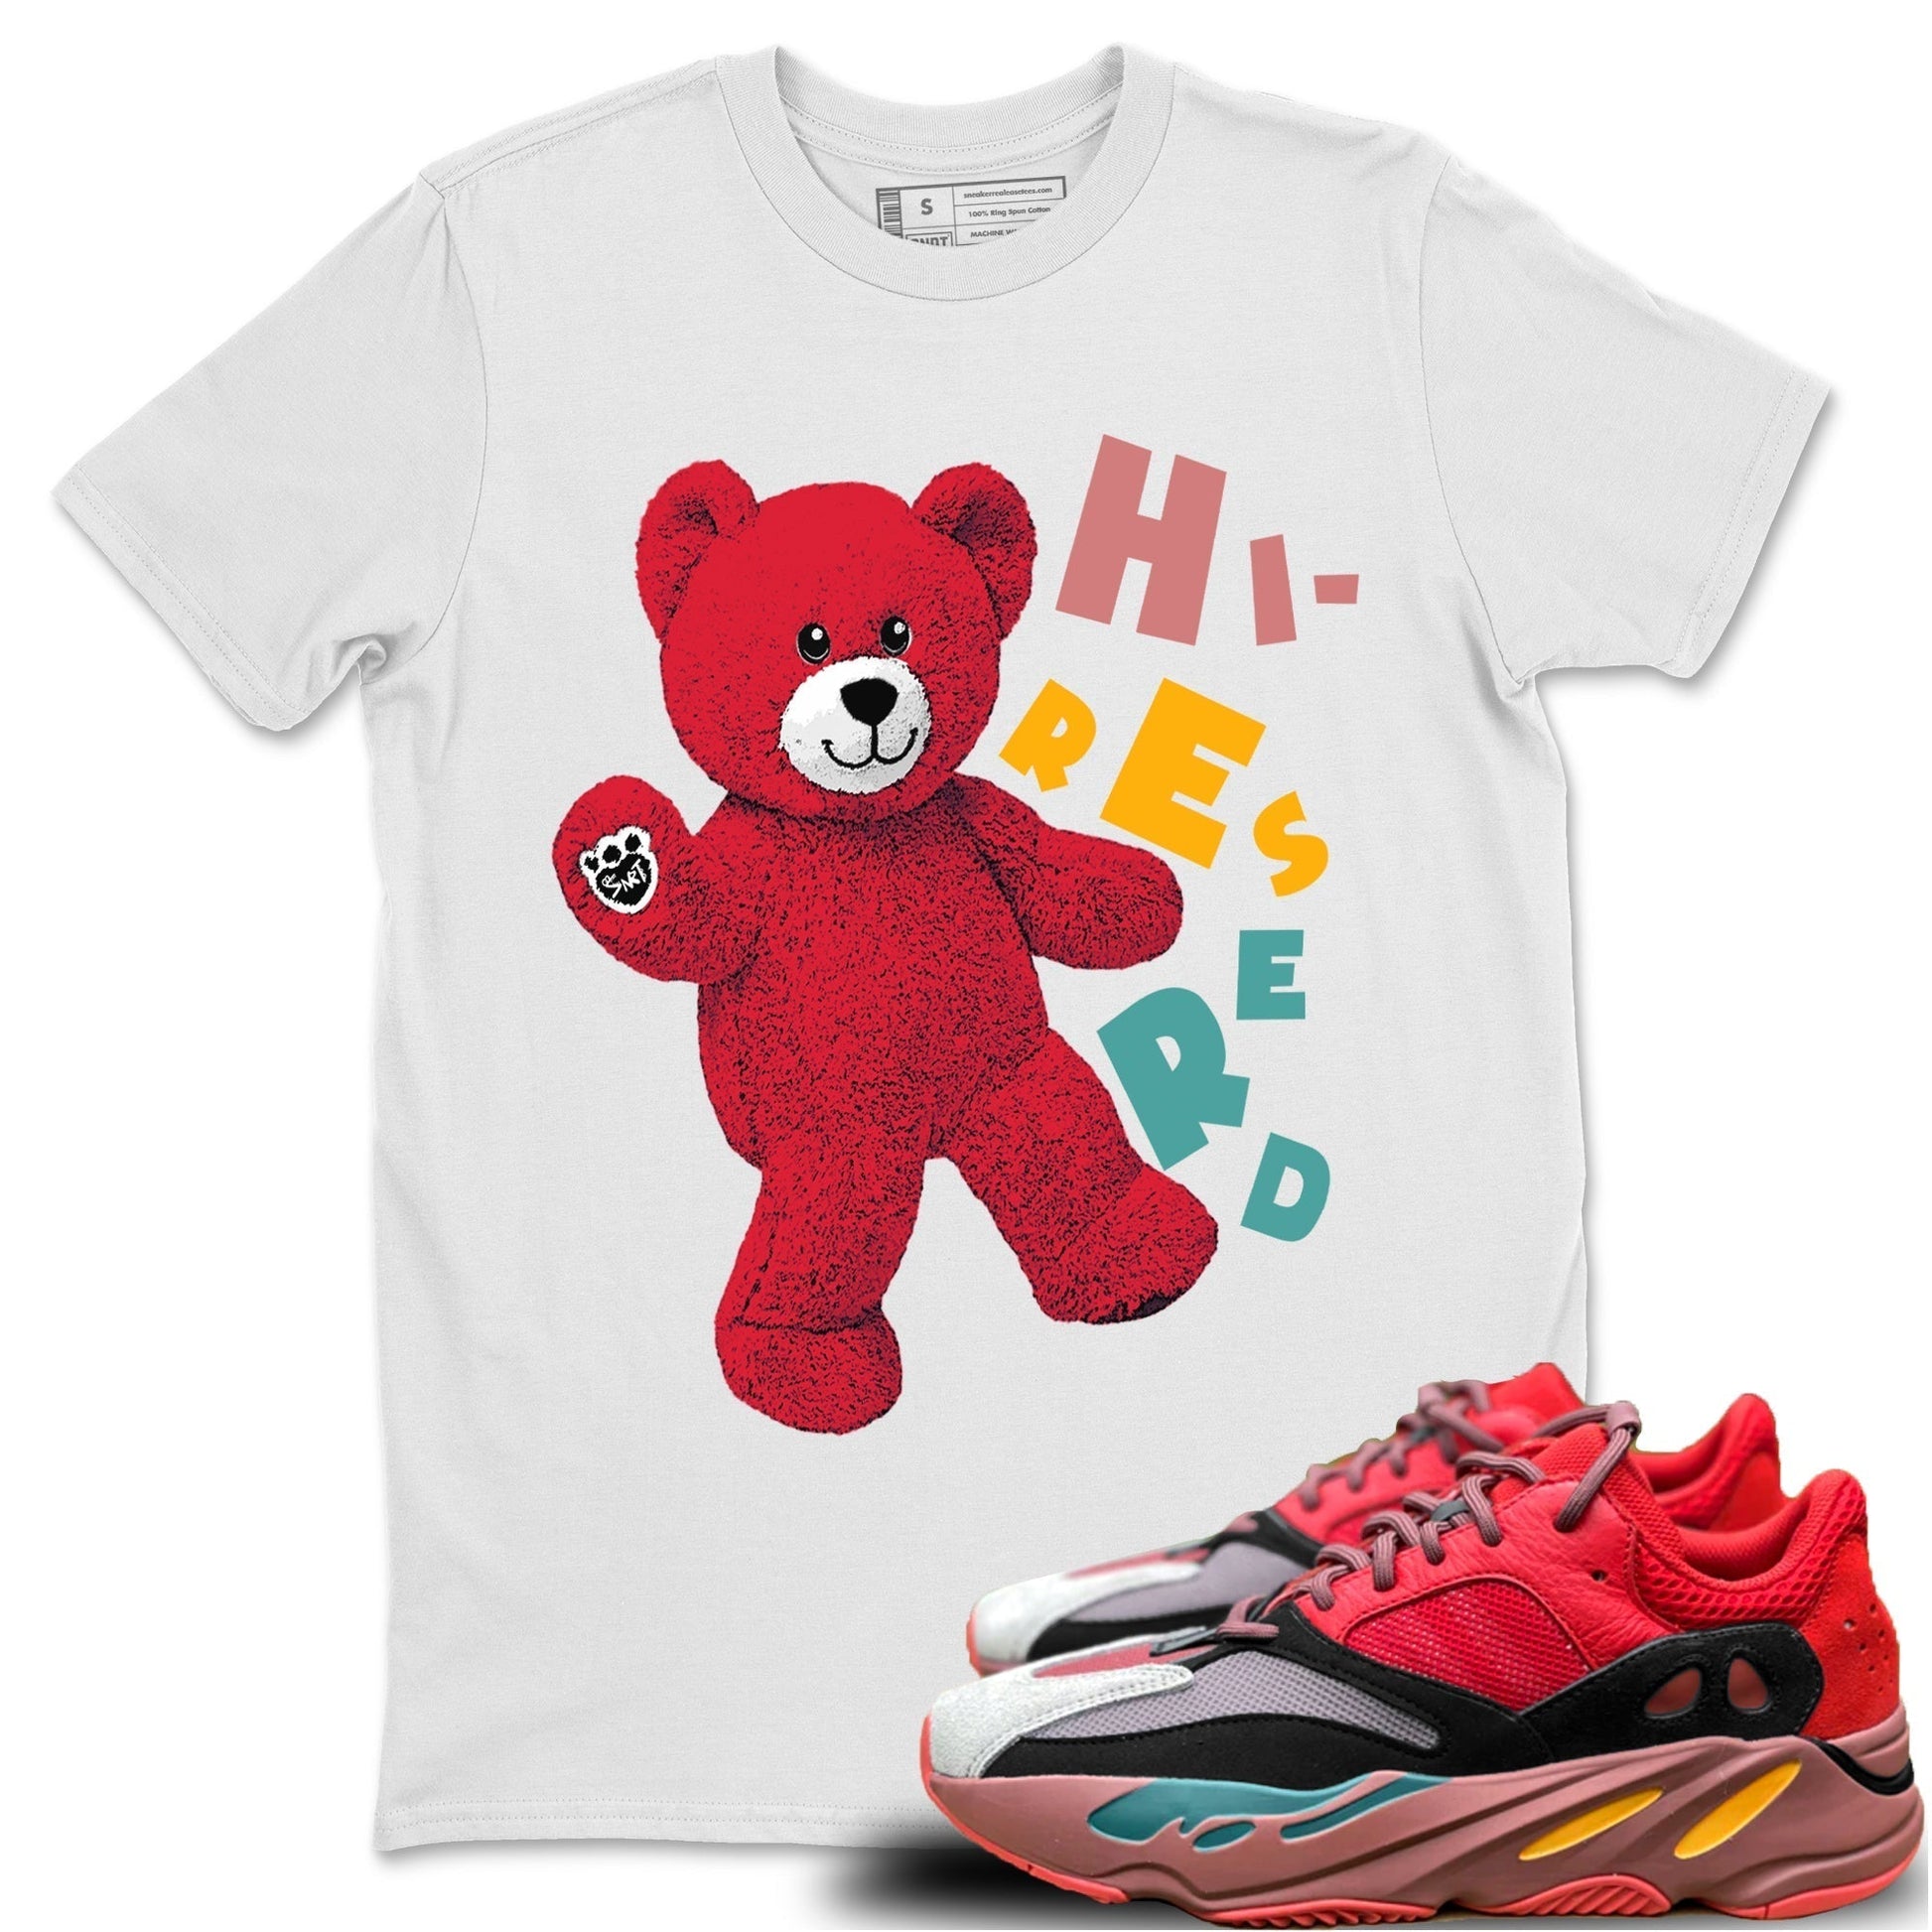 Yeezy 700 Hi-Res Red Sneaker Match Tees Hello Bear Sneaker Tees Yeezy 700 Hi-Res Red Sneaker Release Tees Unisex Shirts